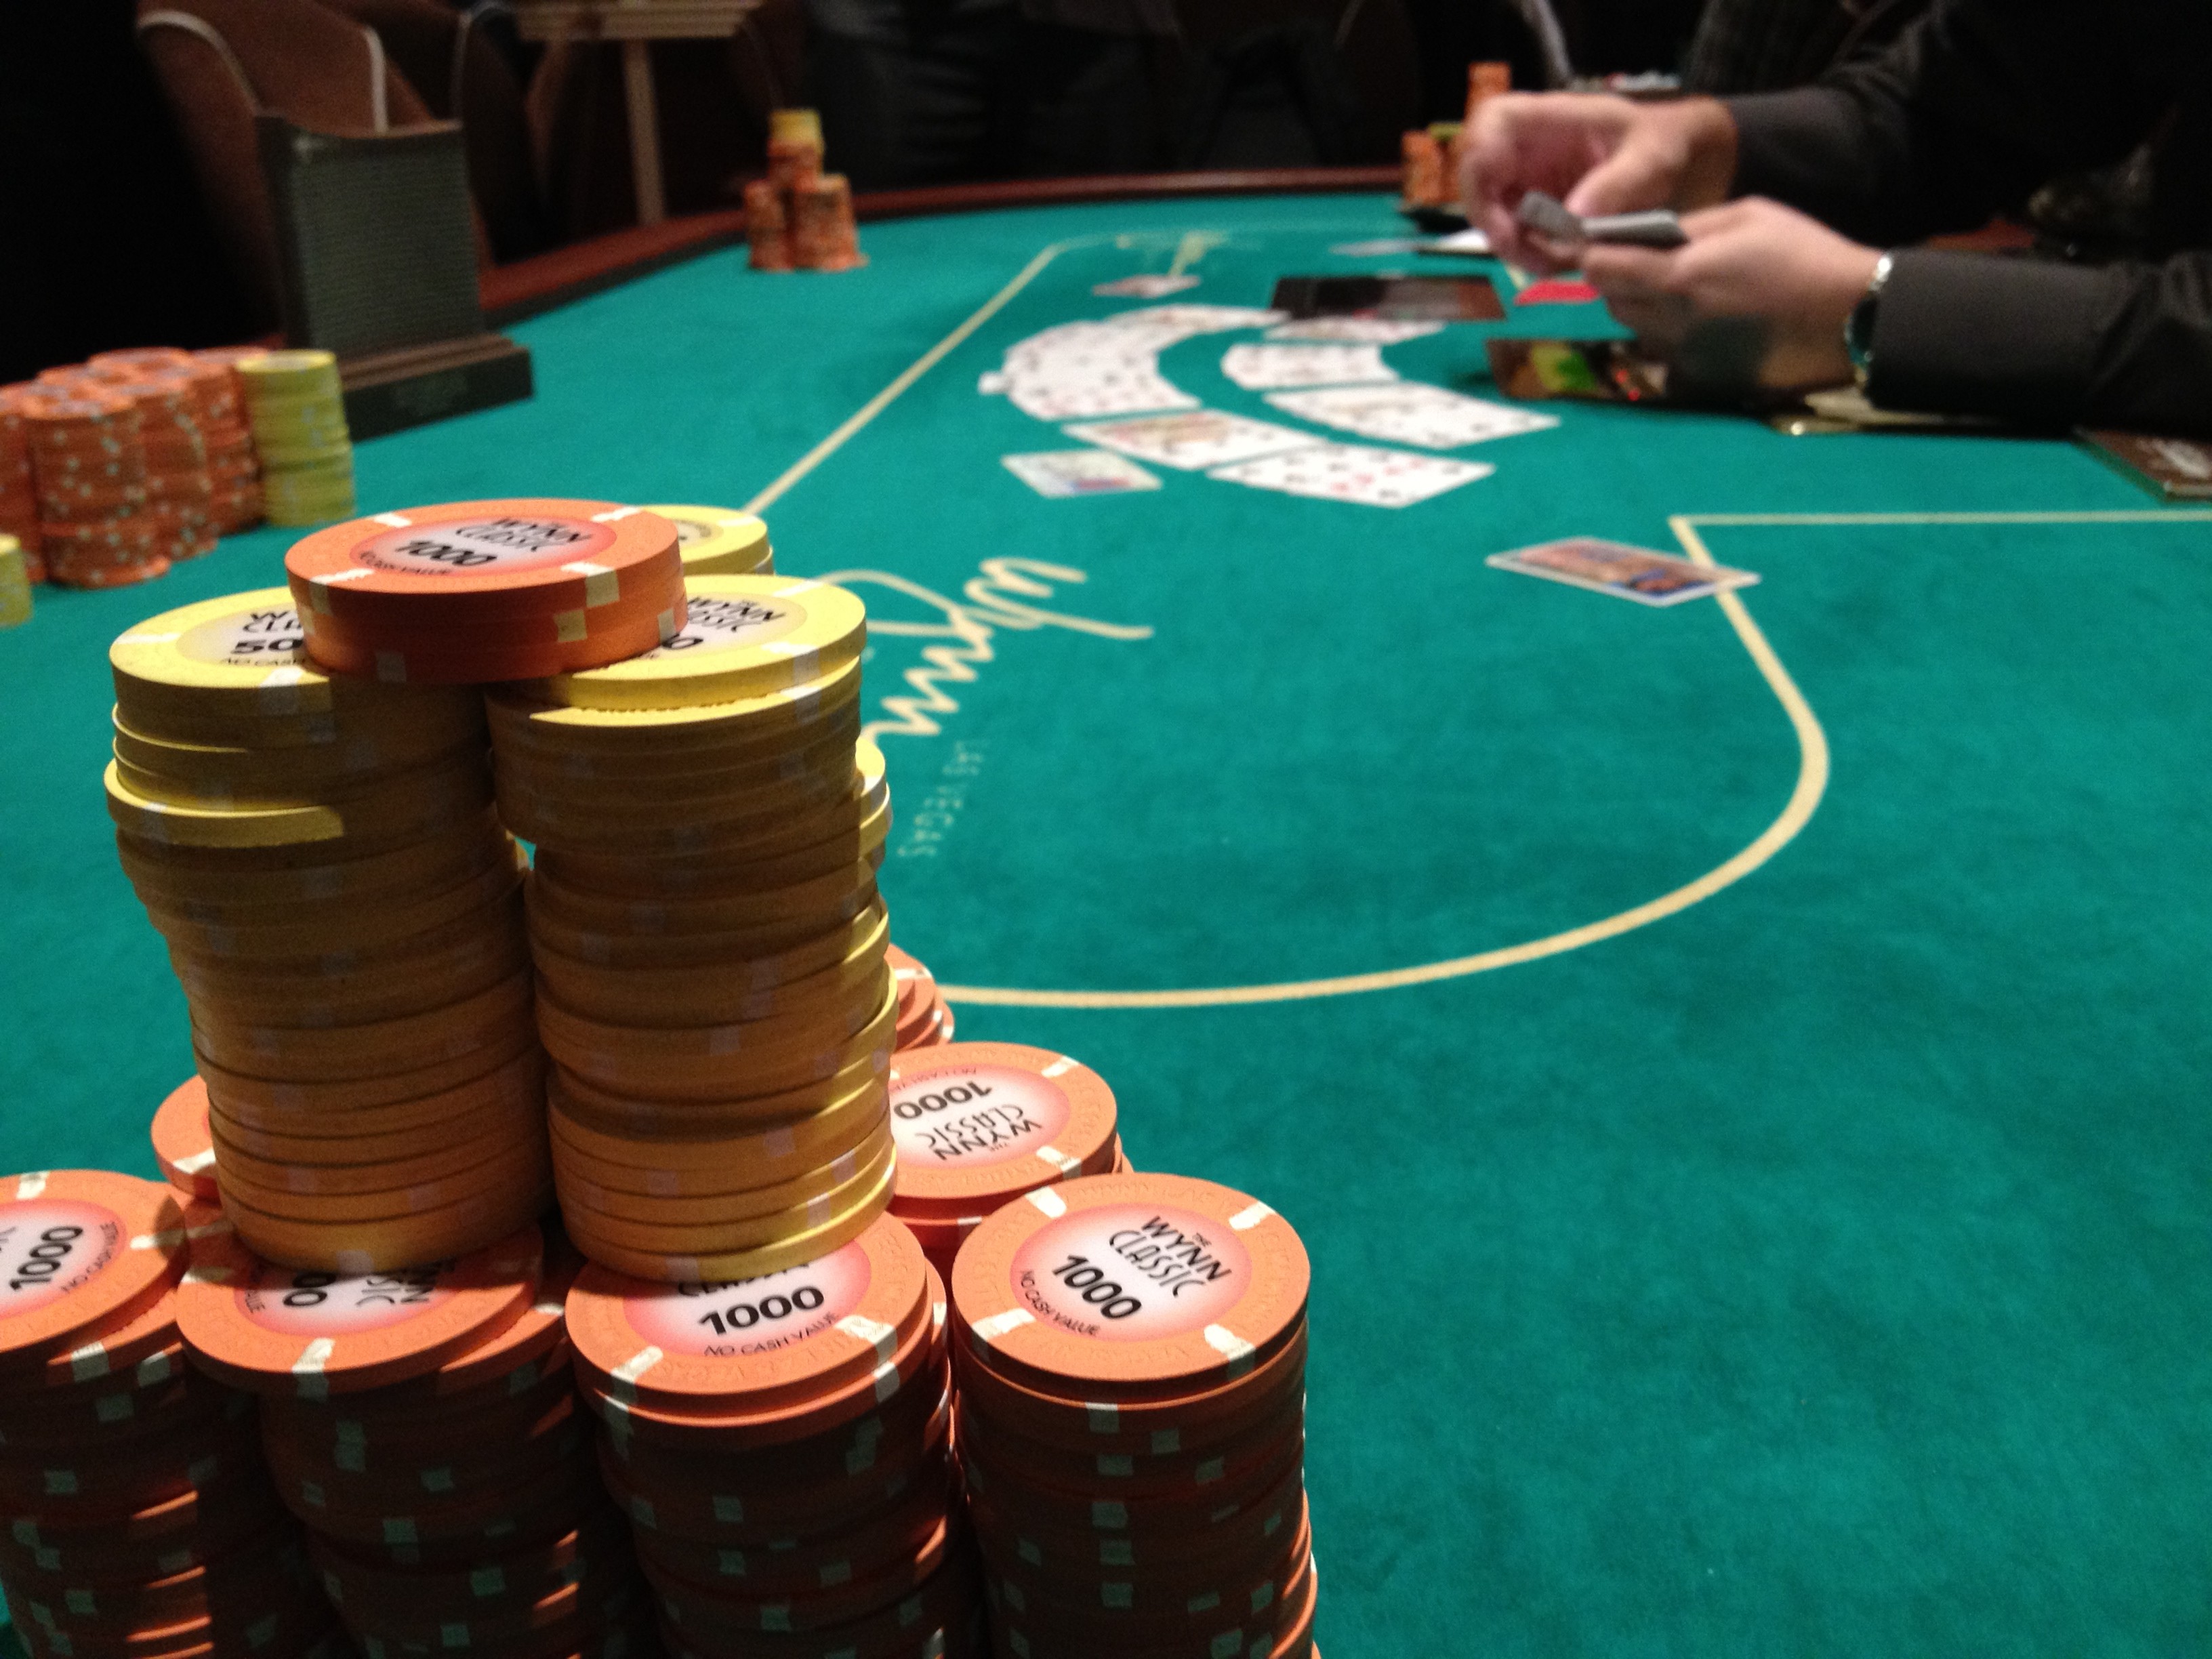 Wynn win-win: Recapping my first good tourney score in a while ...